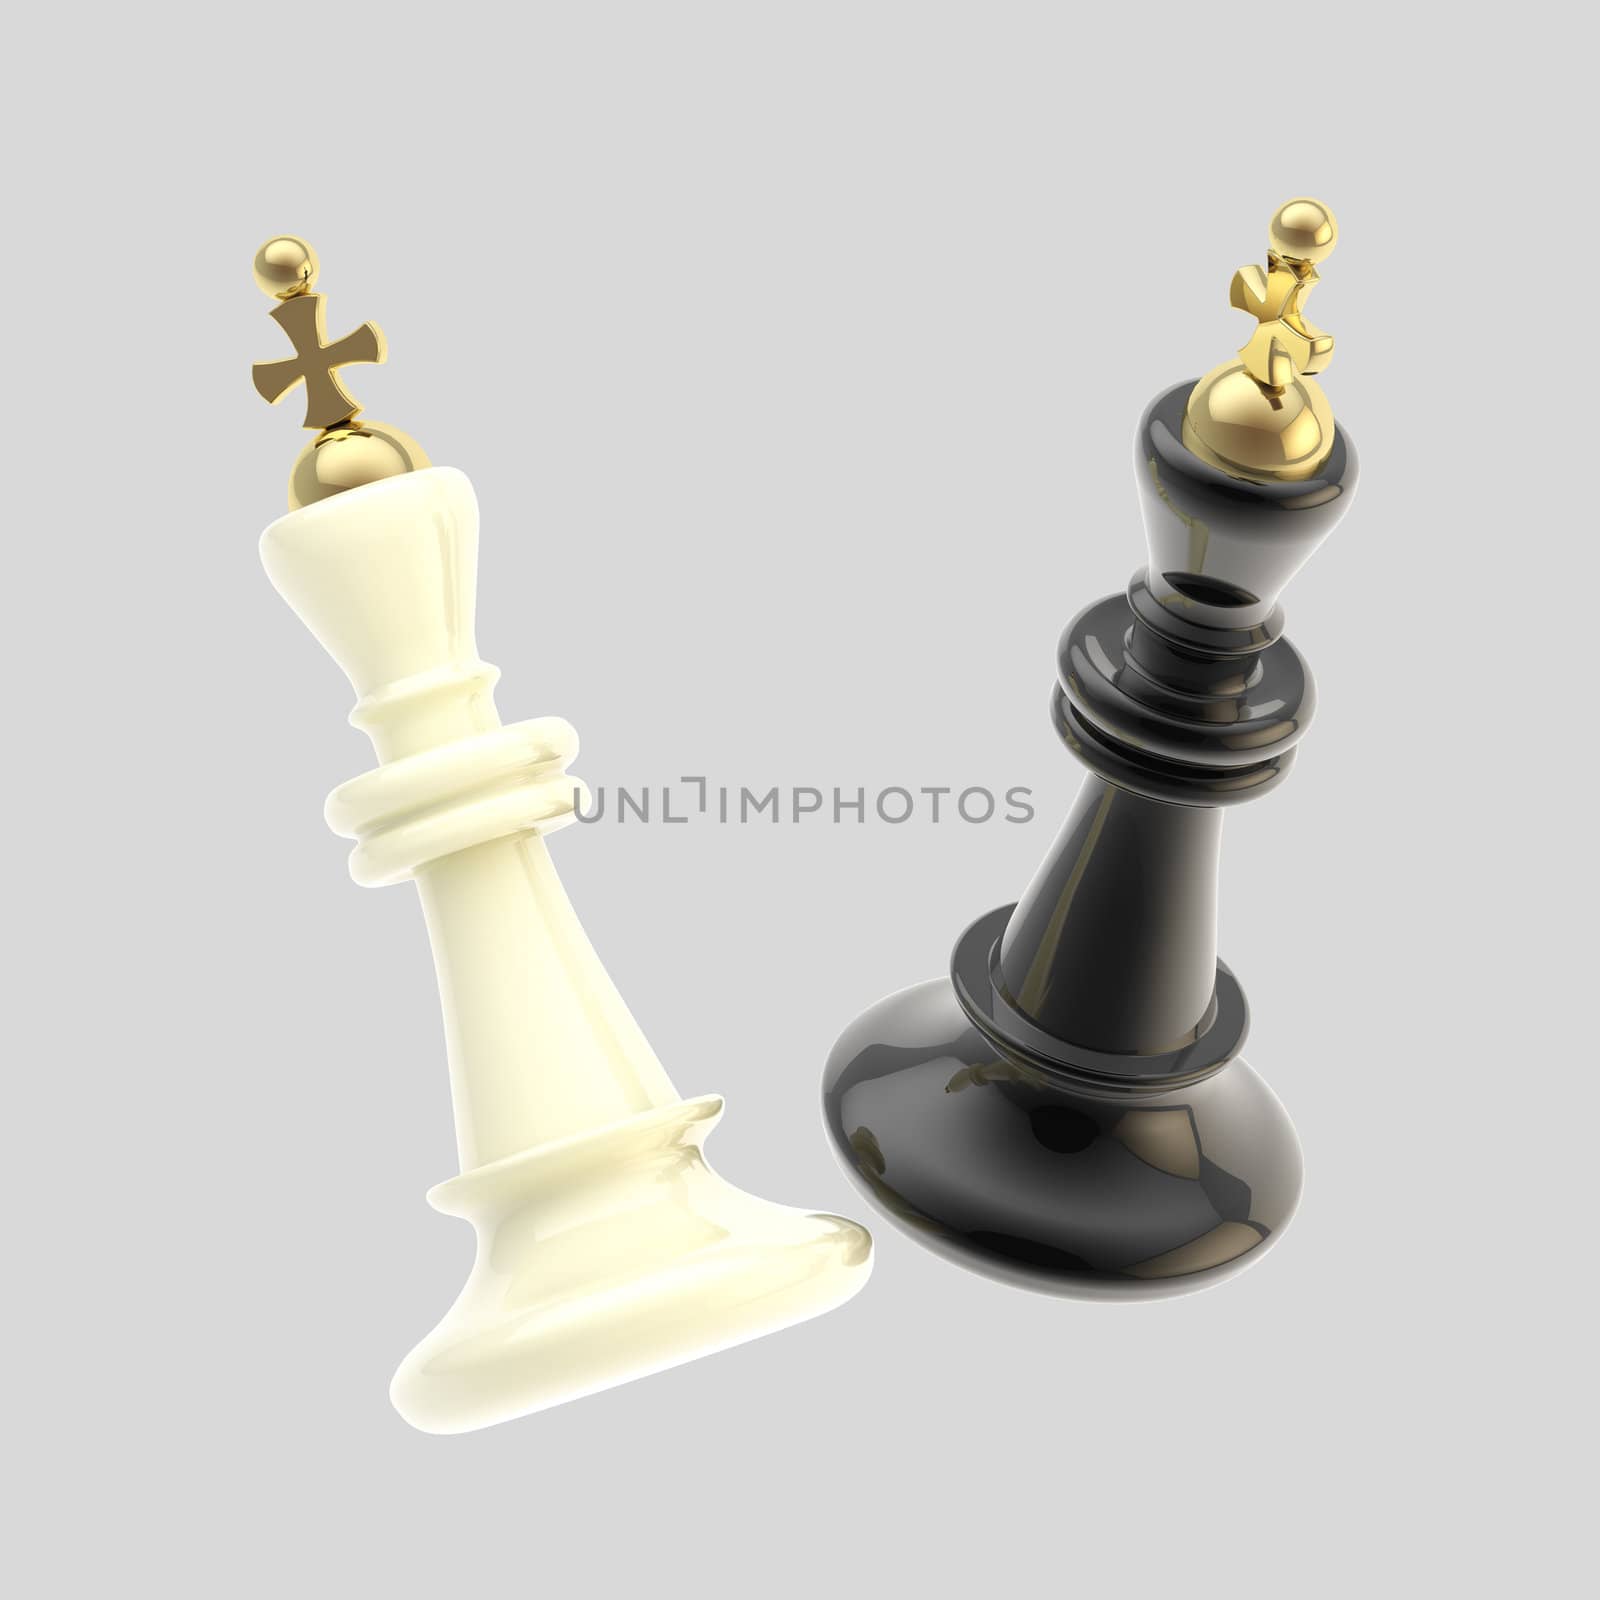 Competition: black and white king figures by nbvf